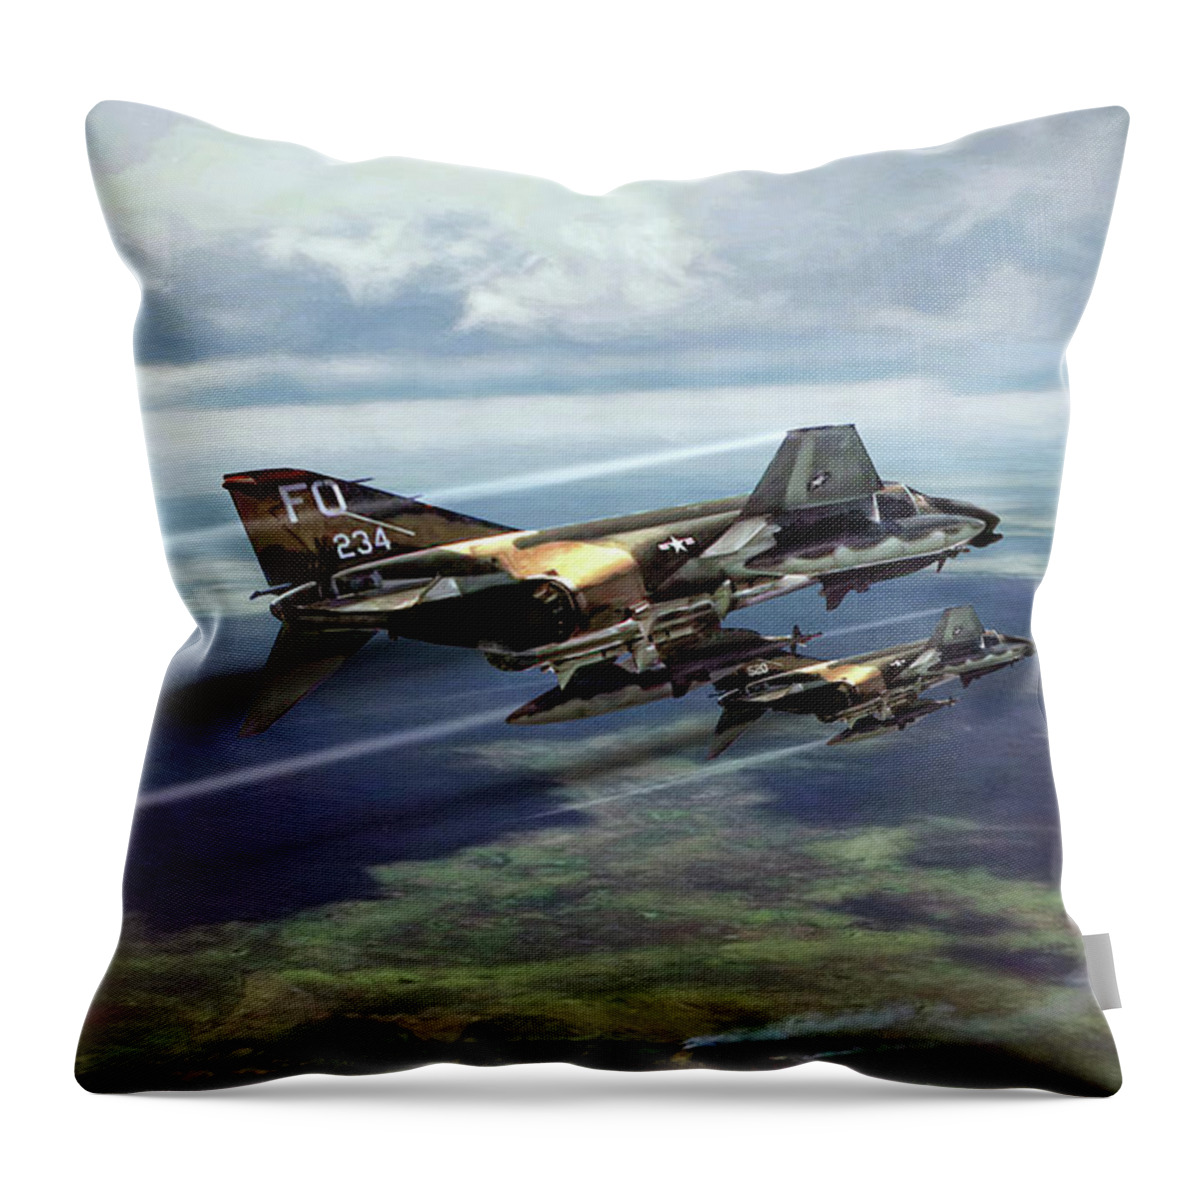 Aviation Throw Pillow featuring the digital art Let's Rock And Roll by Peter Chilelli